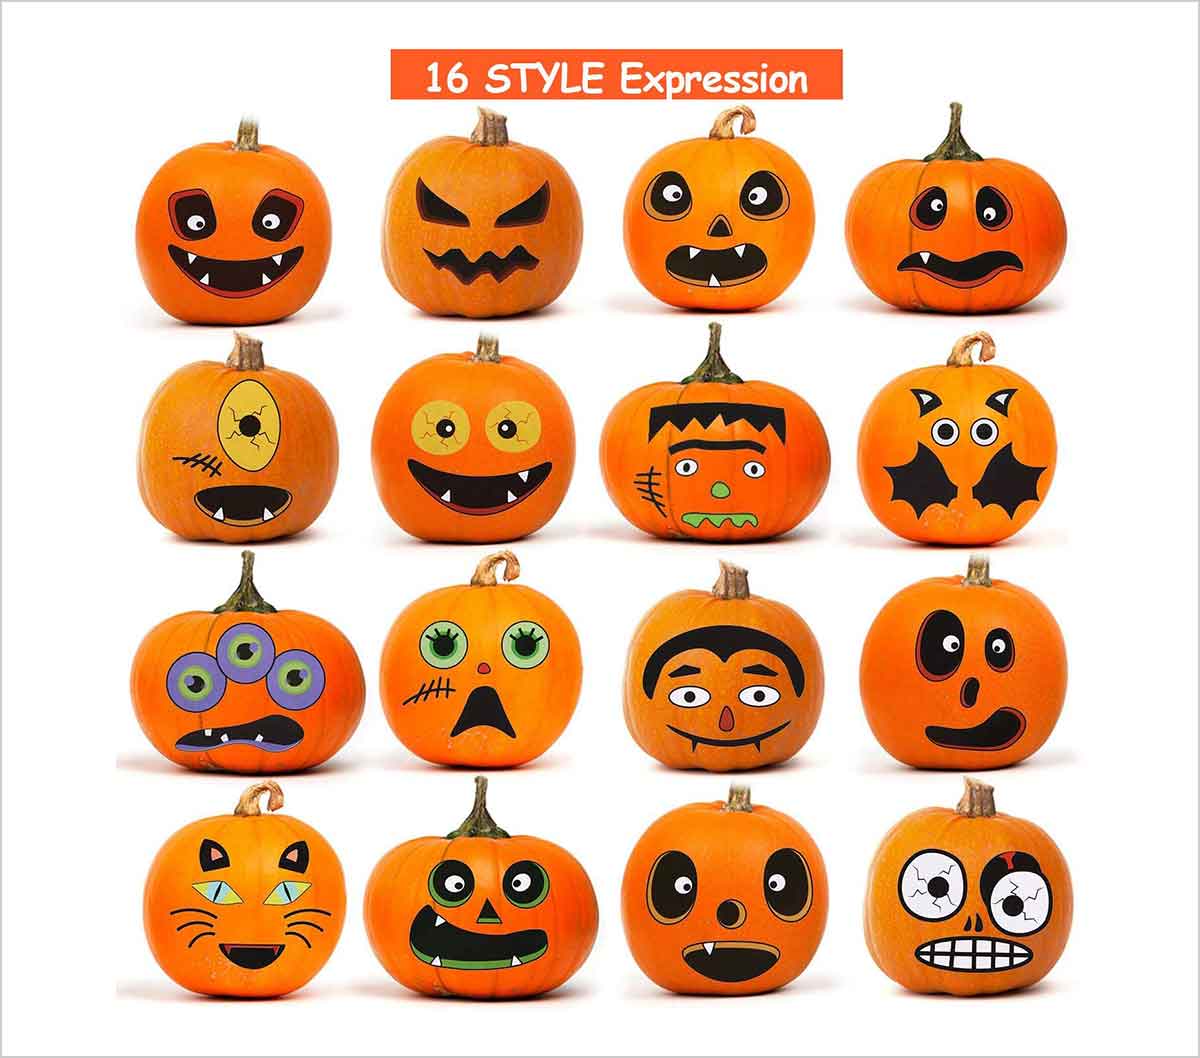 Pumpkin Decorating Craft Decal Kit for Halloween Themed Party Thanksgiving Day 8 Sheet 28 Facial Expressions Halloween Pumpkin Stickers